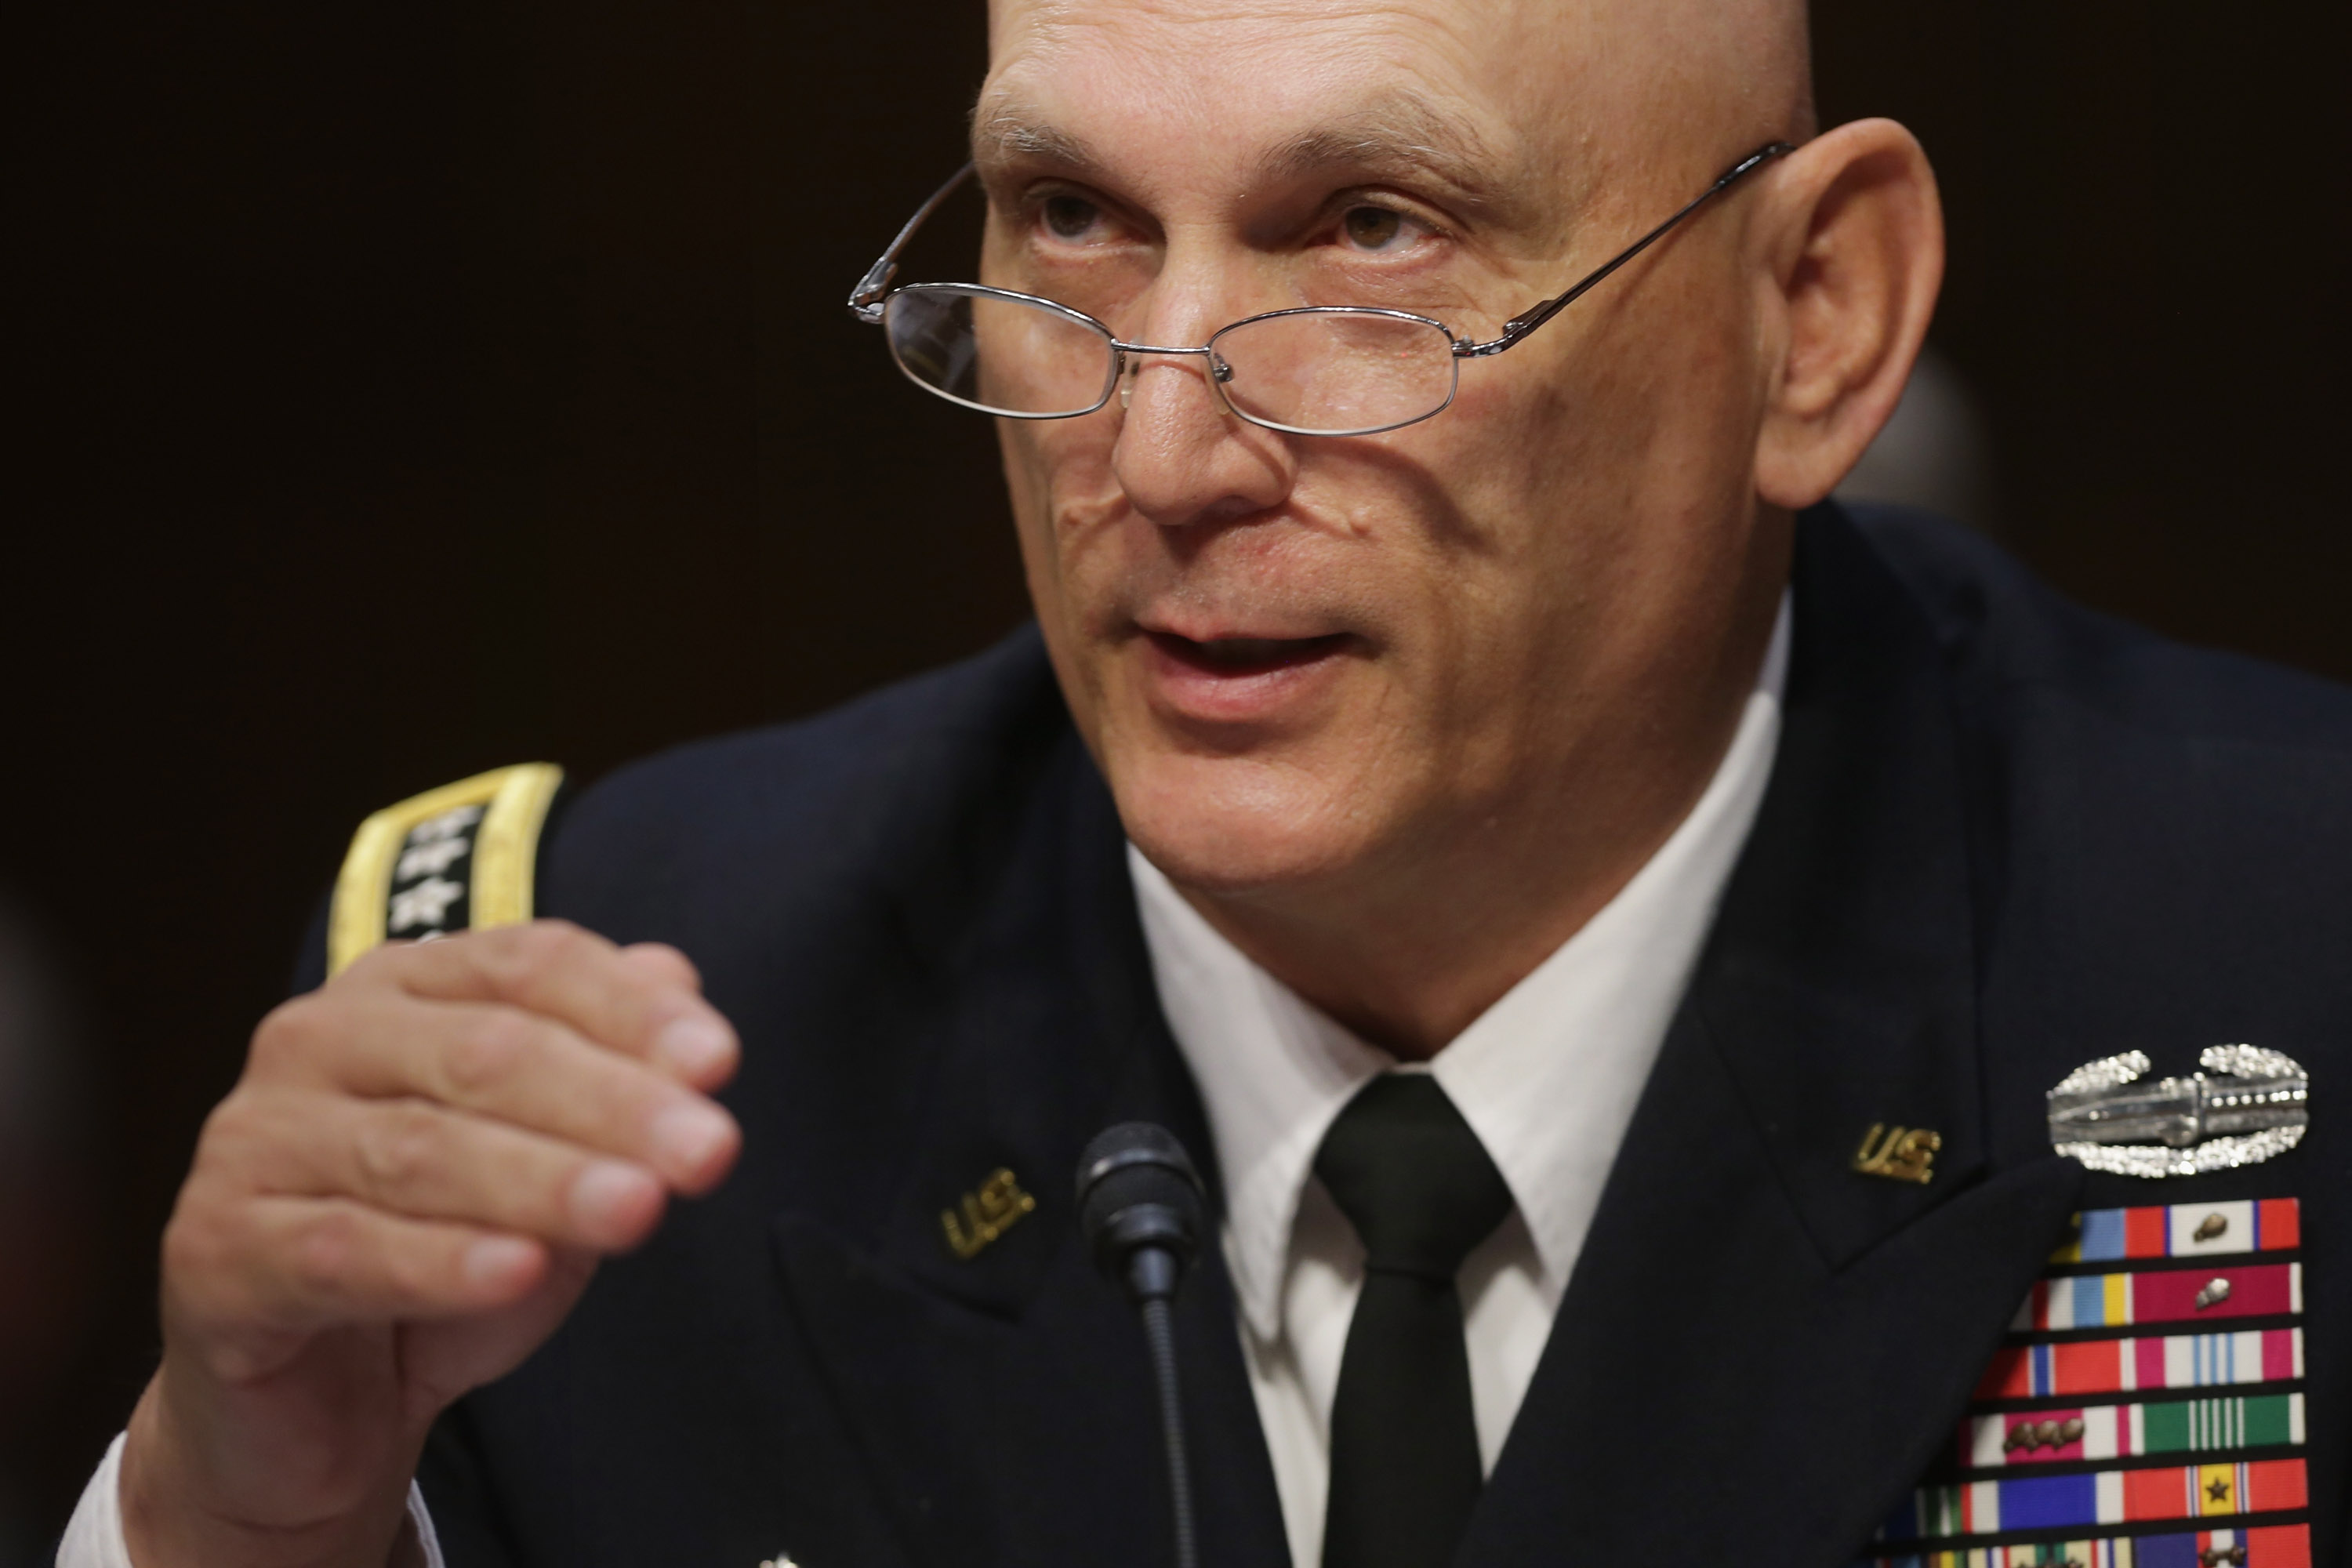 Senate Armed Services Committee Holds Hearing With Top Military Officials On Compensation